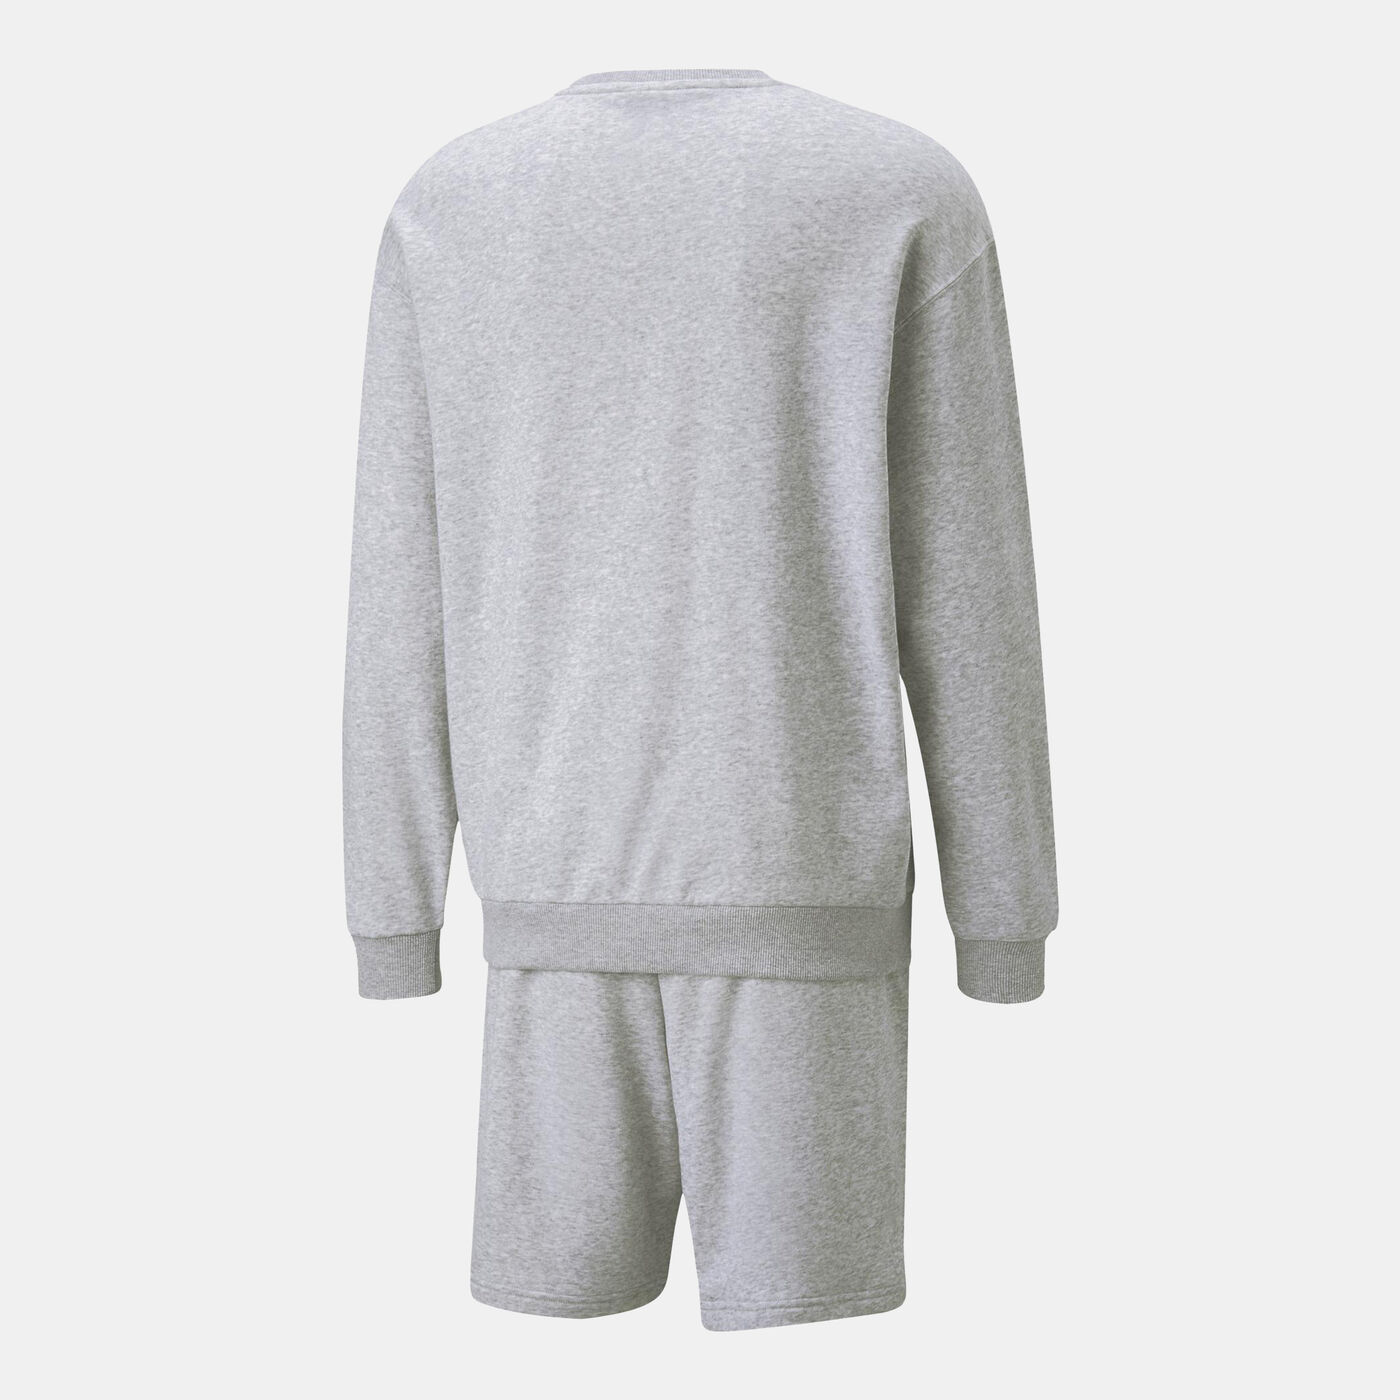 Men's Relaxed Sweat Set